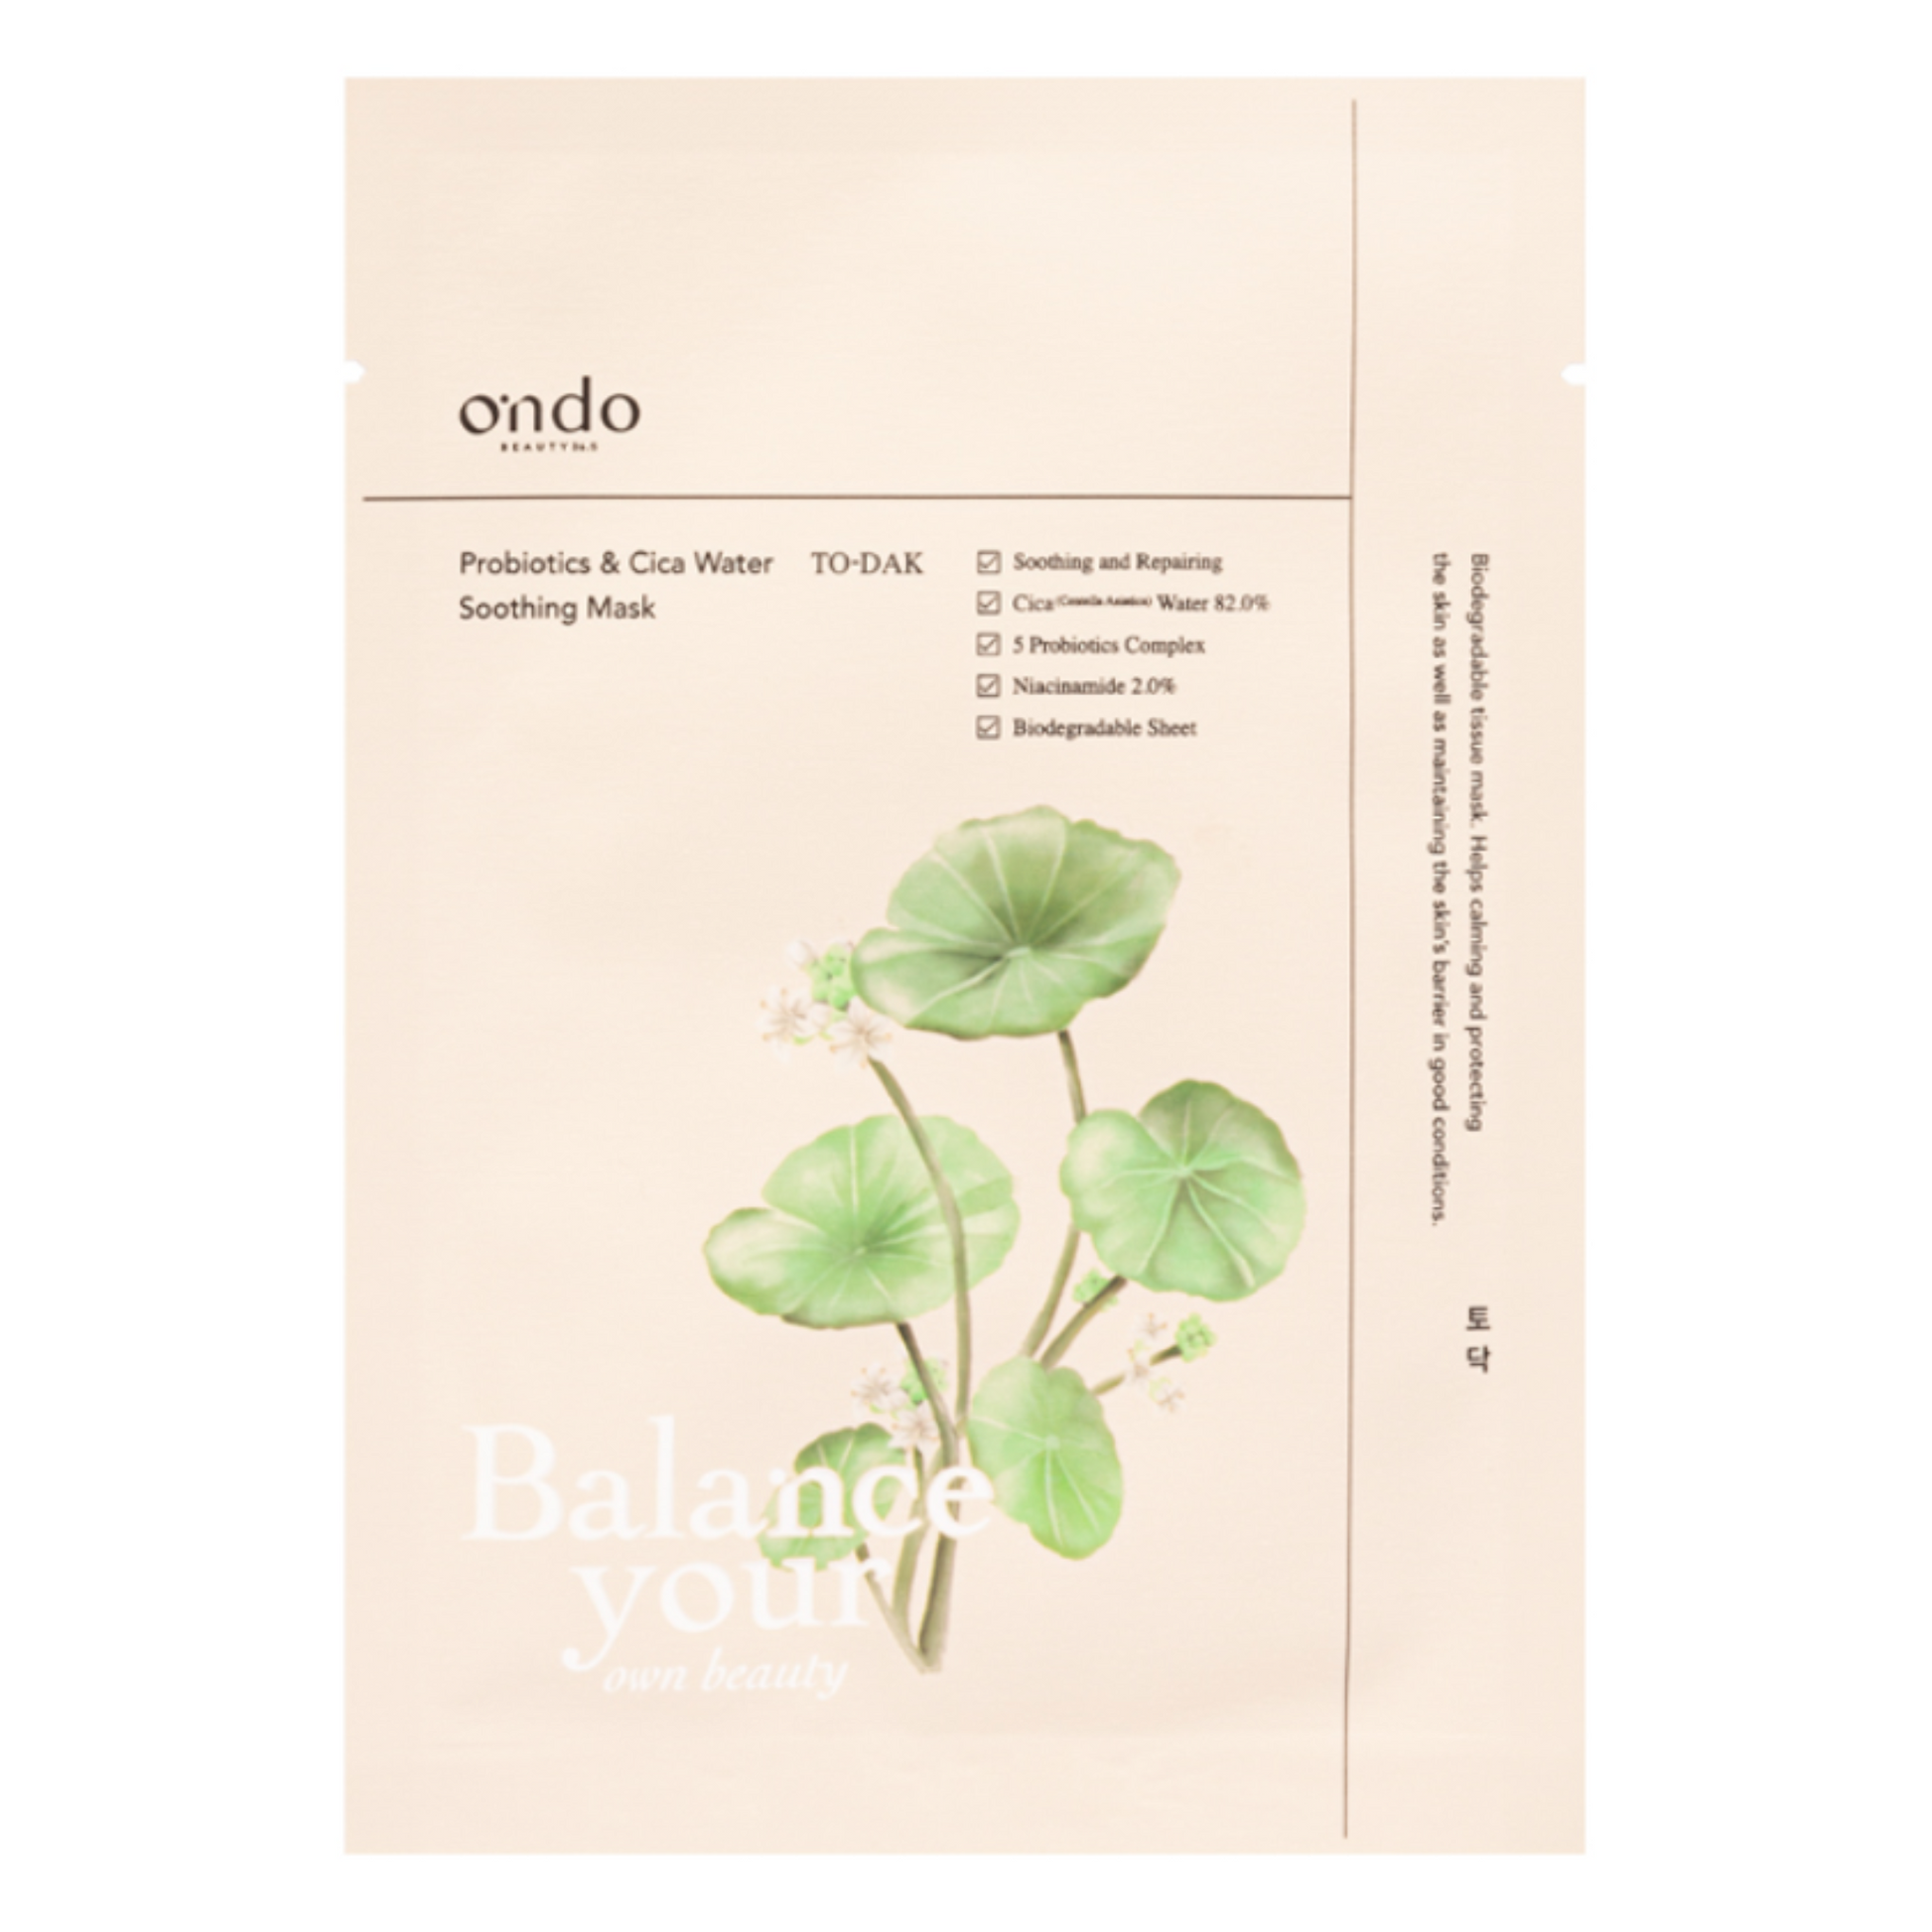 Biodegradable tissue mask with 82% Centella Asiatica, 5 probiotic complex and Niacinamide to soothe and repair the skin.